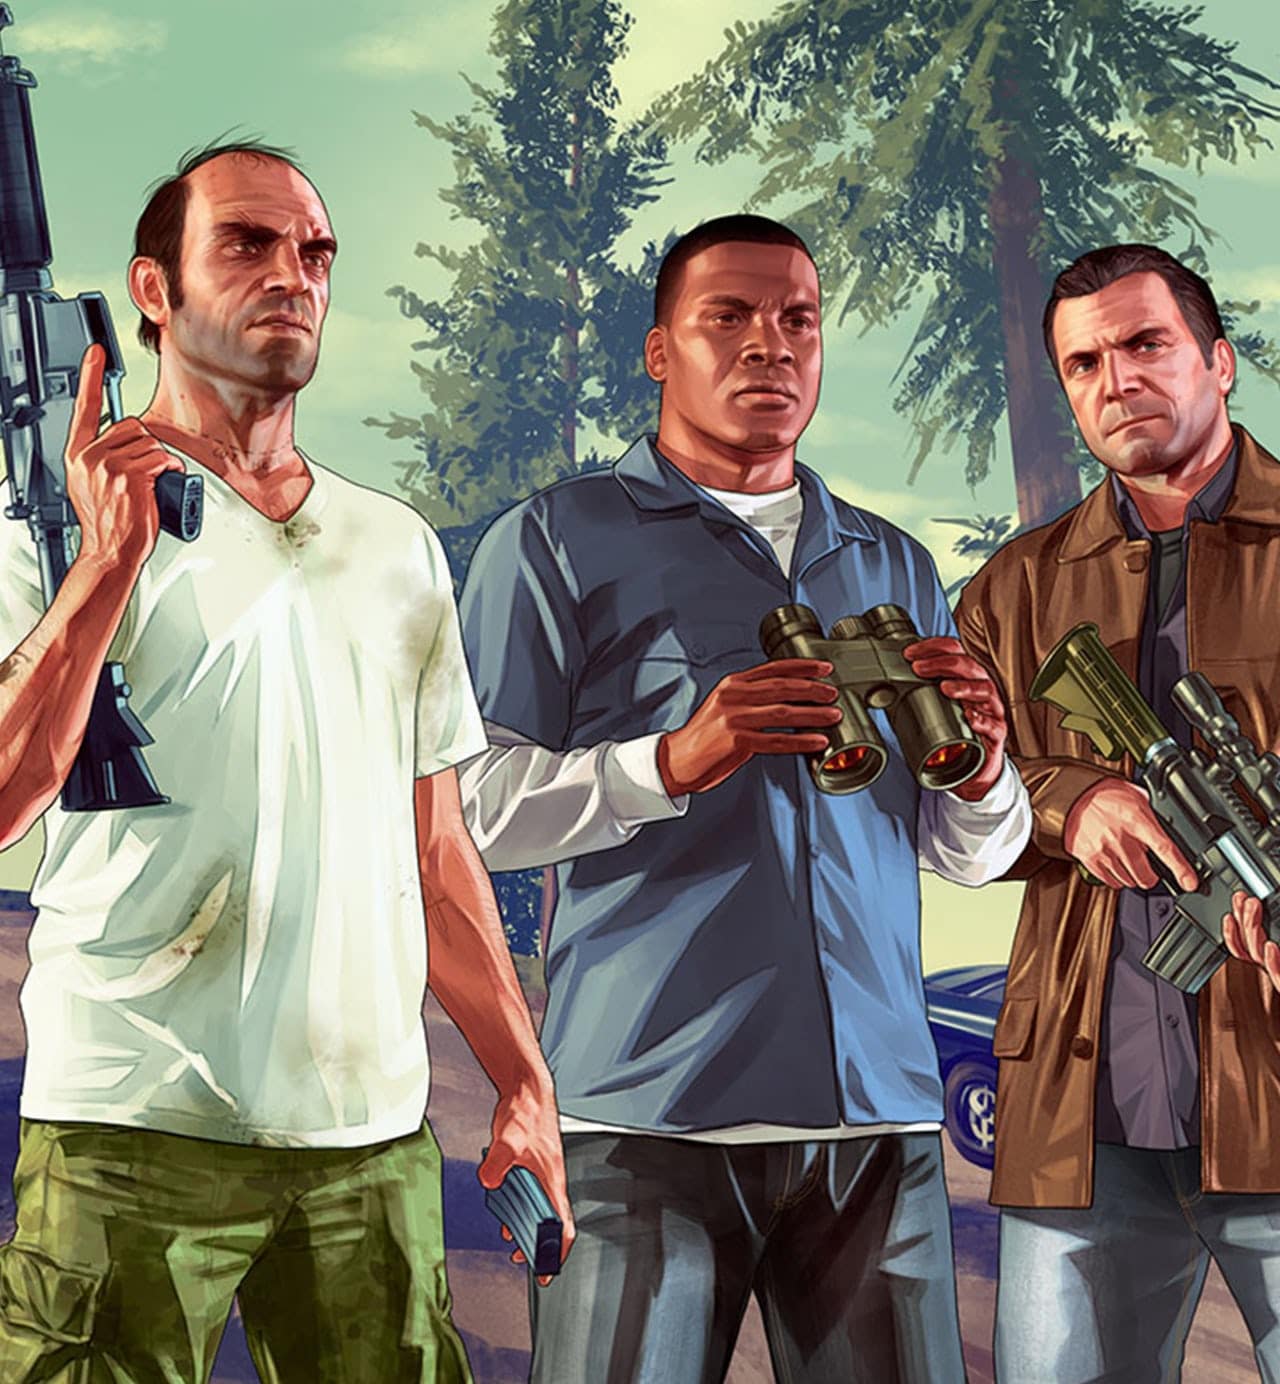 Grand Theft Auto 5 Guide (GTA 5) for PC, PS4 and XBOne